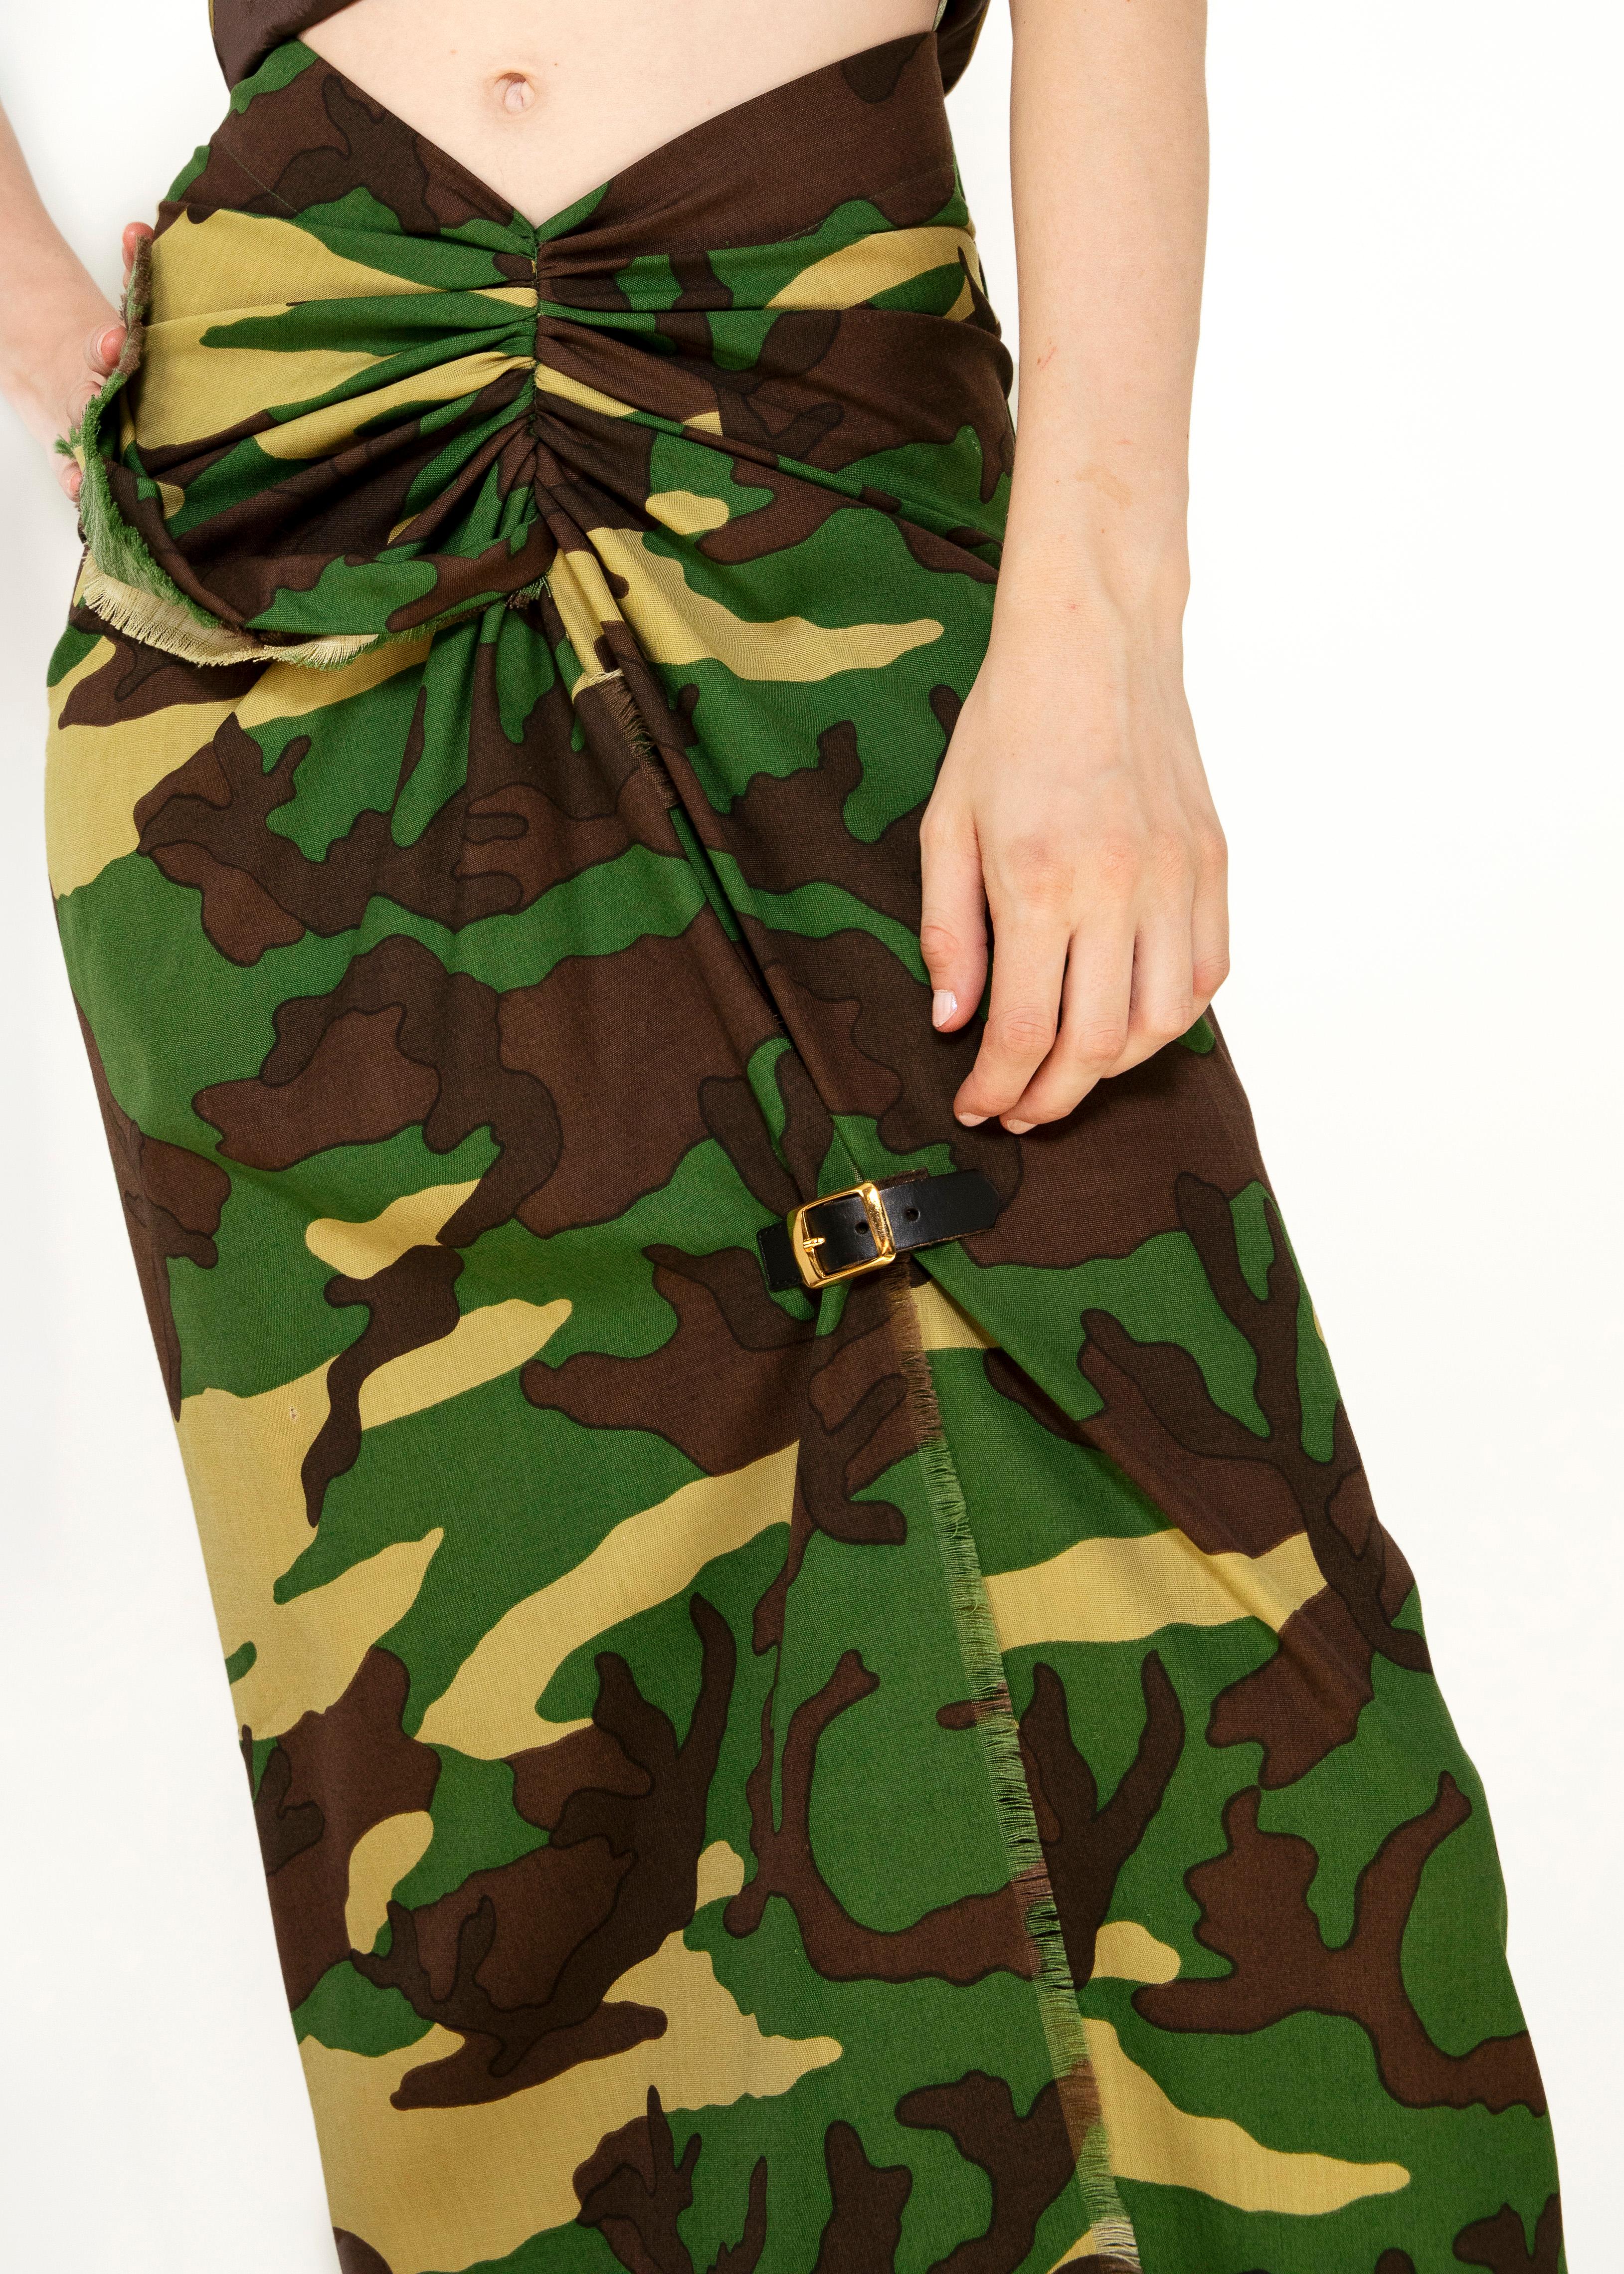 Moschino Couture Camouflage 3 Pc Skirt, Jacket, & Corset Set For Sale 3